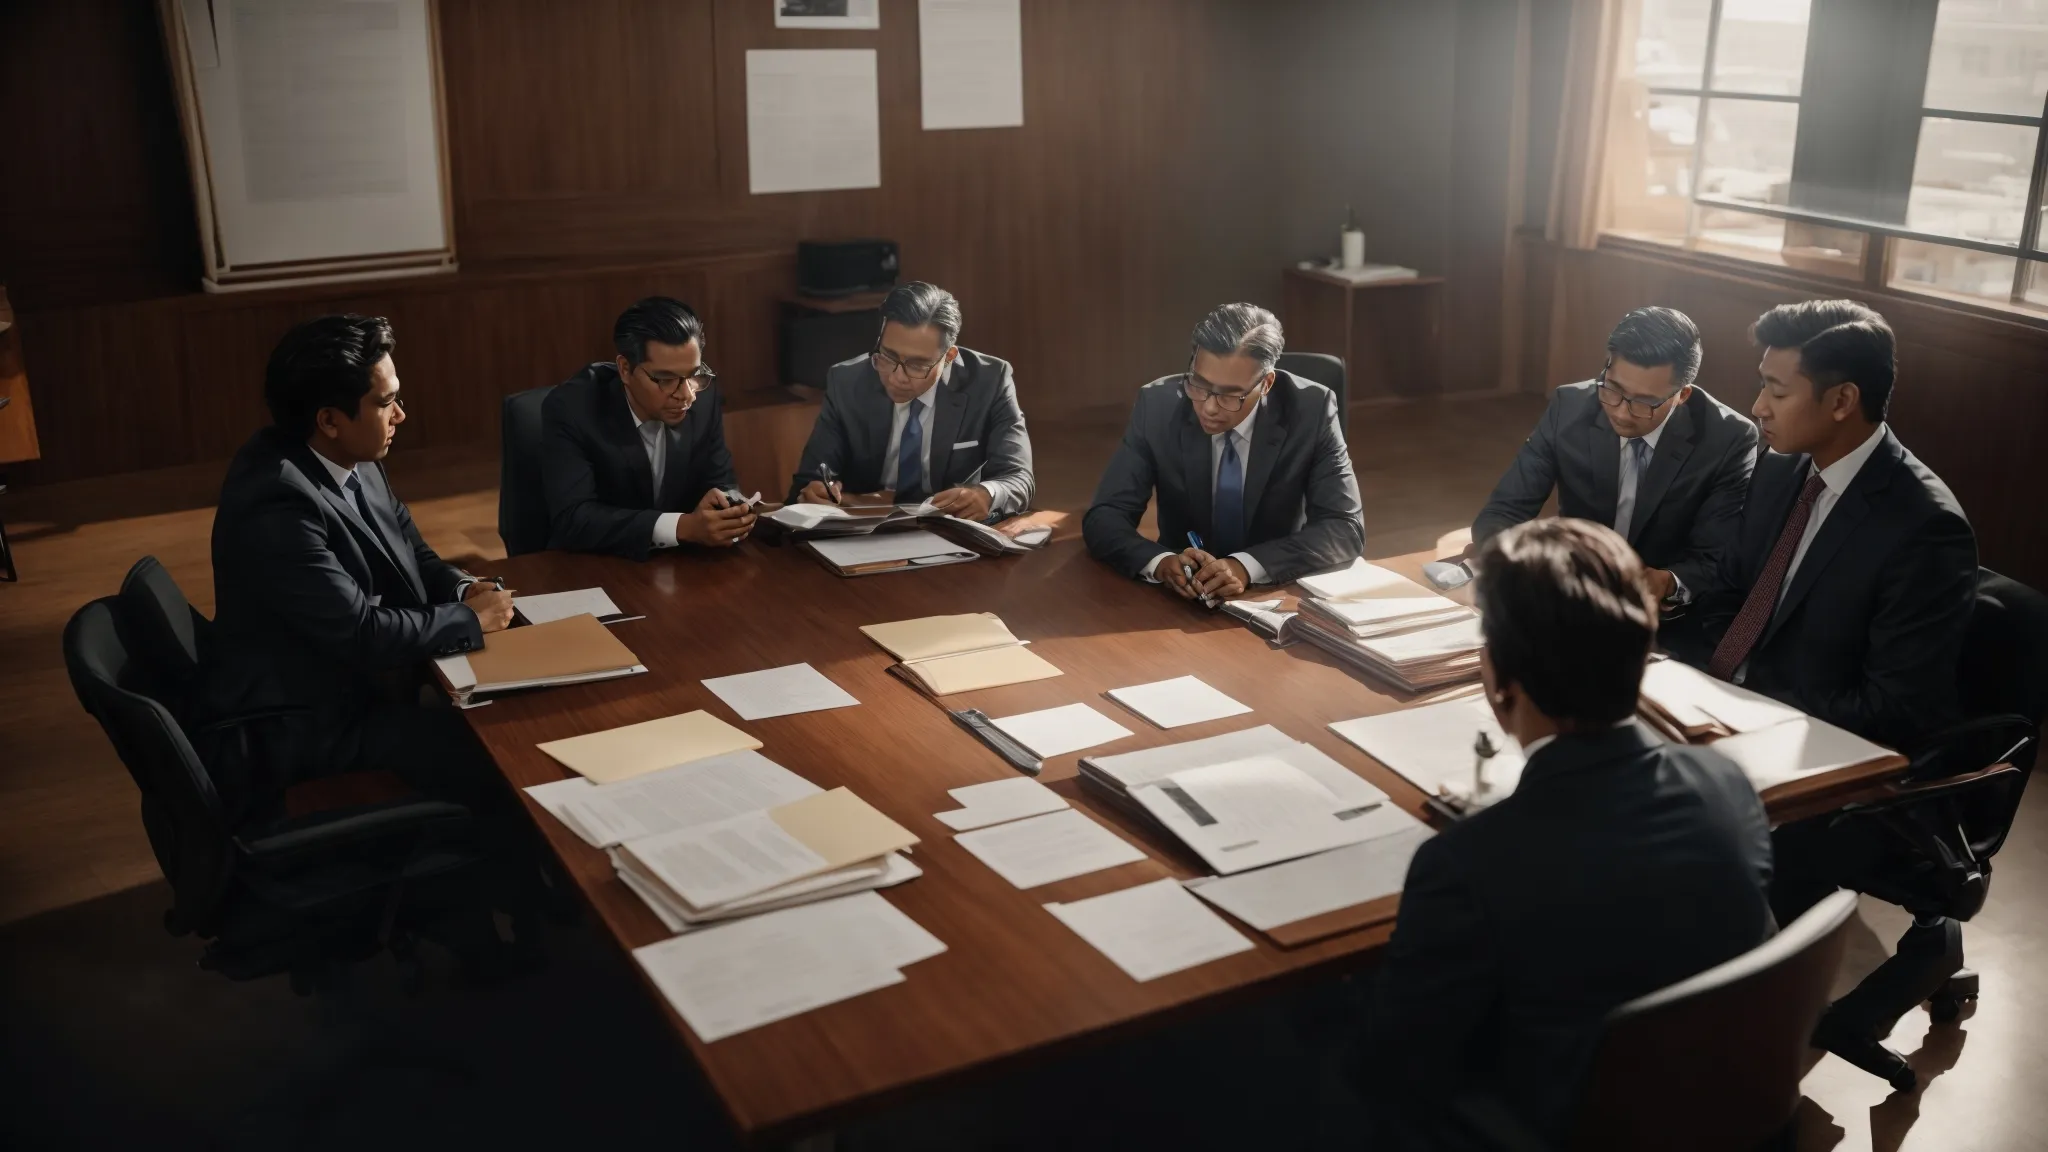 a group of professionals gathered around a conference table, intently discussing documents and strategies.